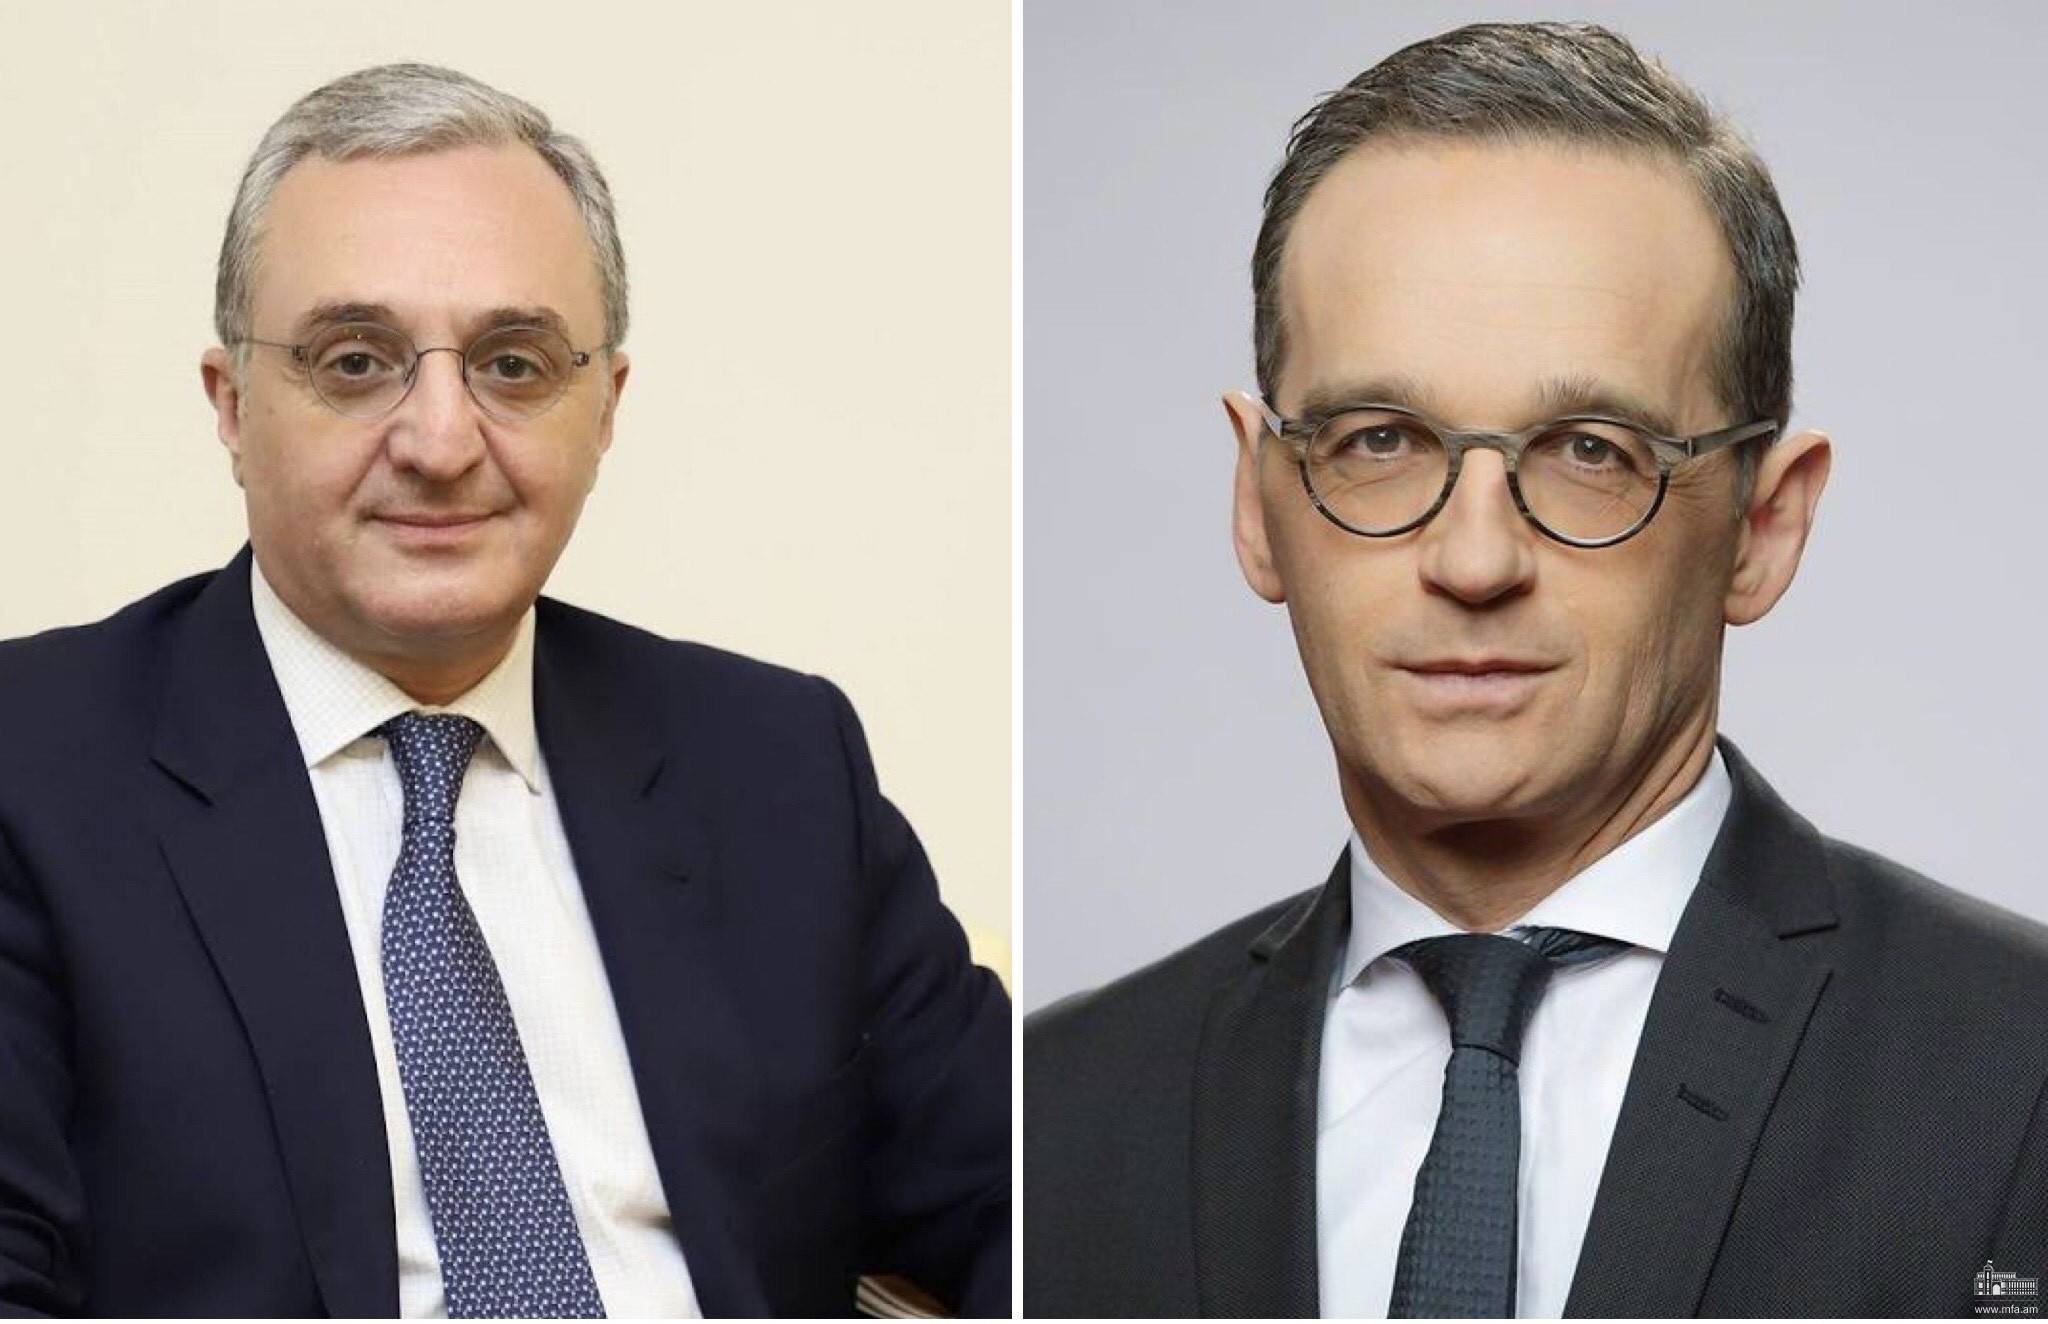 Phone conversation of the Foreign Minister Zohrab Mnatsakanyan with Heiko Maas, Federal Foreign Minister of Germany